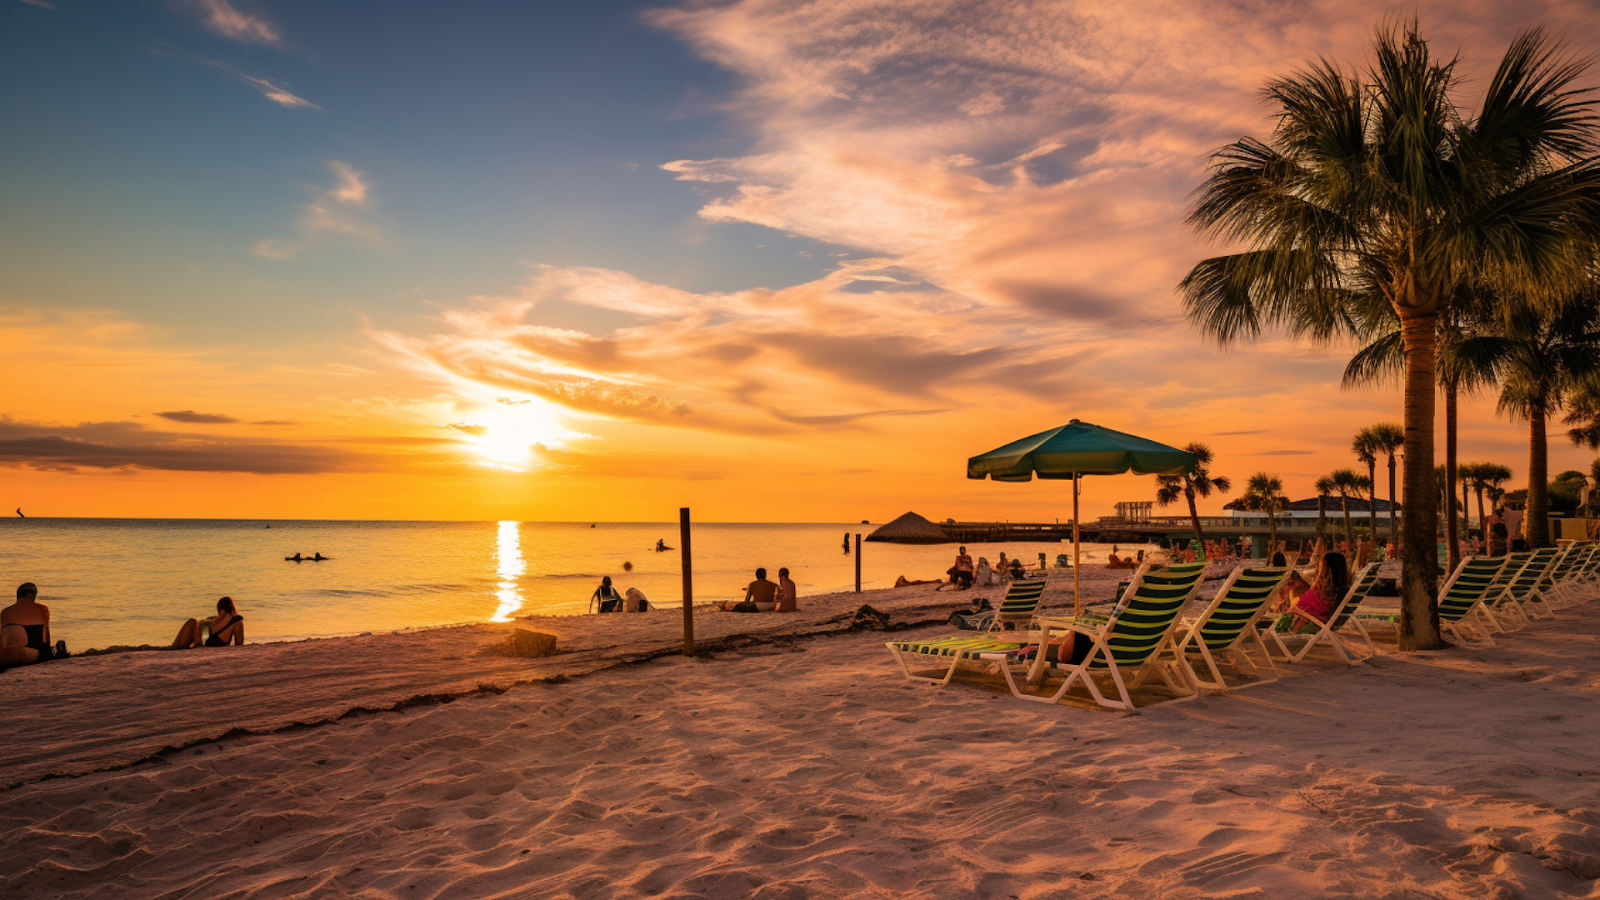 The serene beach sunset in Sarasota, Florida, inviting relaxation and illustrating why it's listed as one of the best cities to live in the USA.